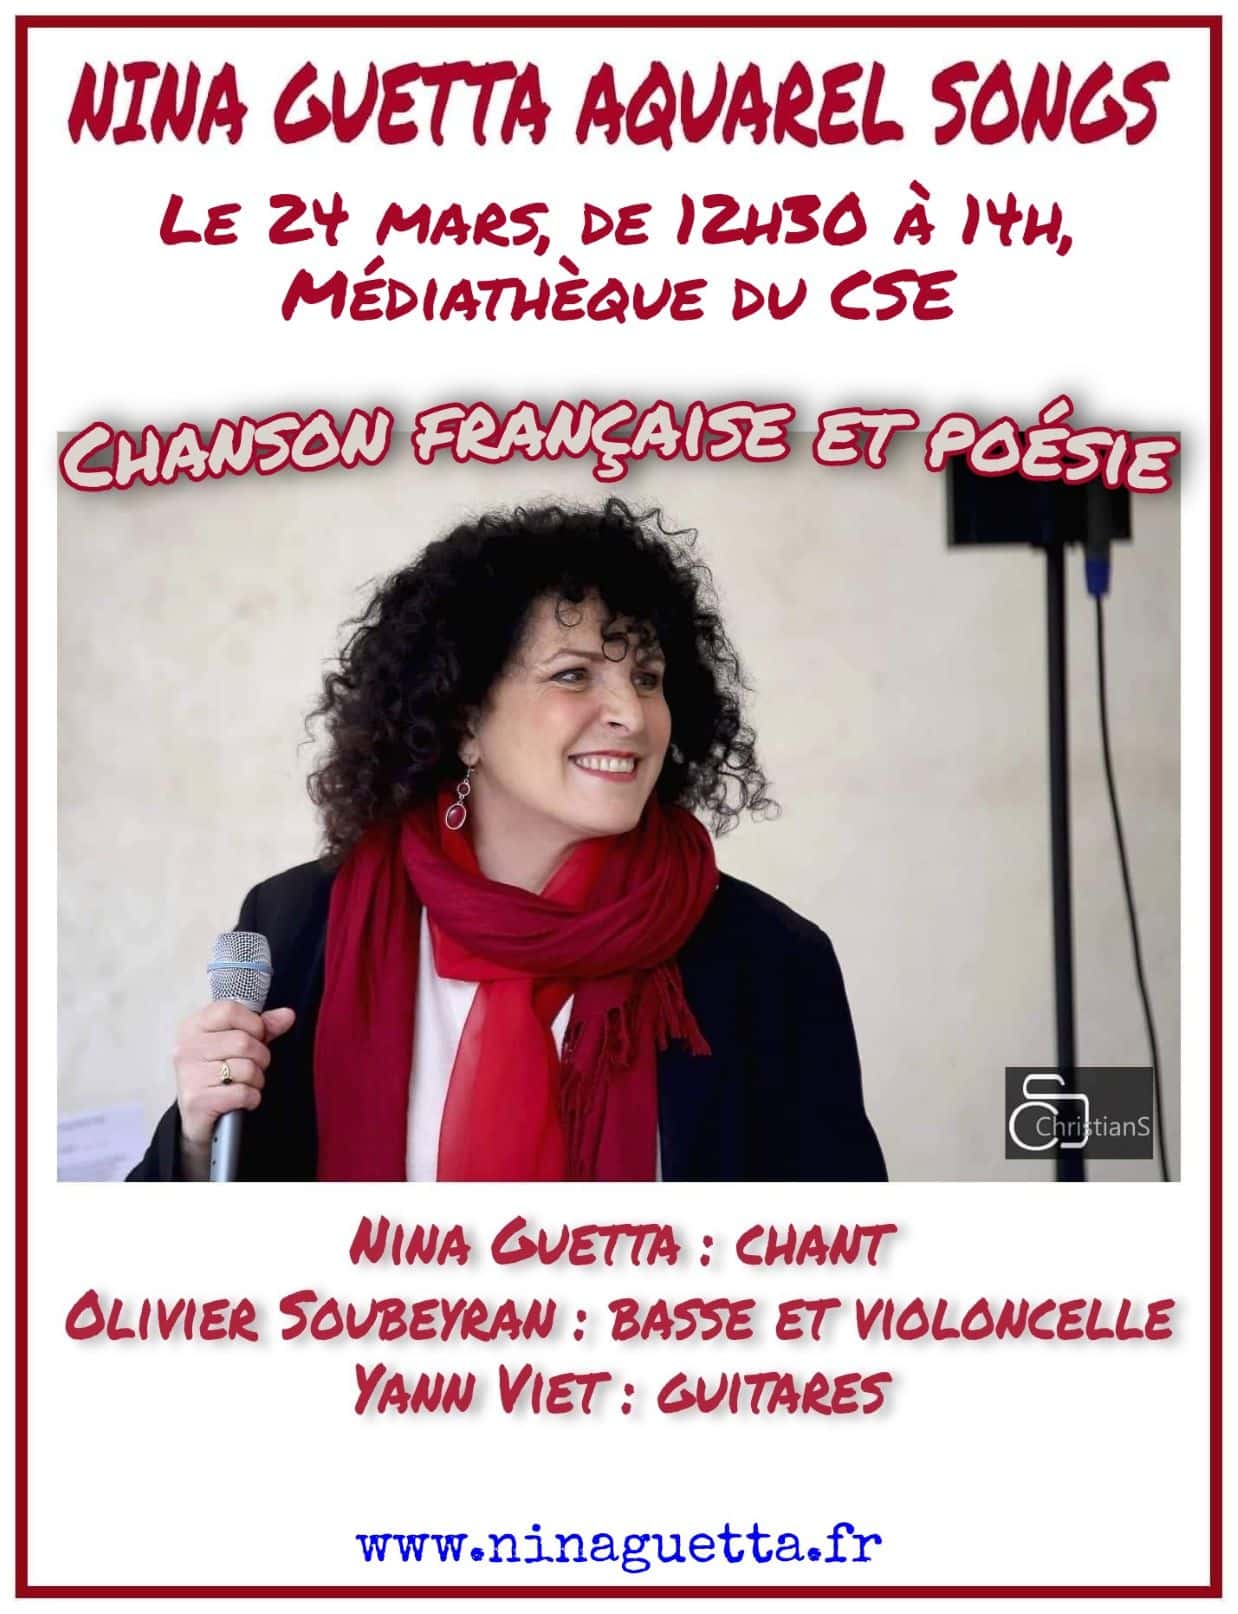 Concert at the Media Library of  Dassault-Aviation, thursday the 24.03.2022 – Chanson Française